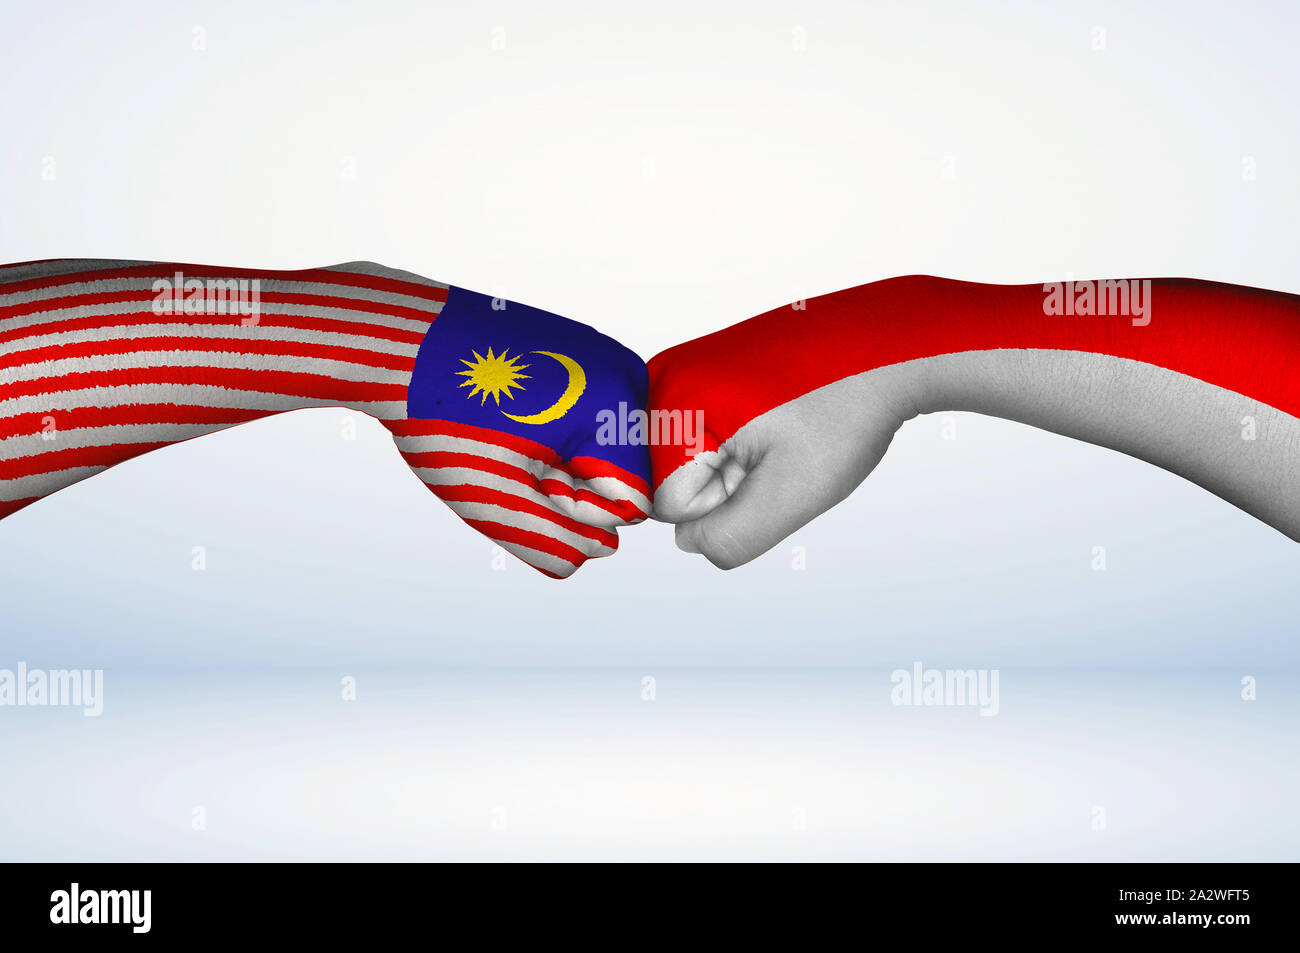 Fist bump of Malaysian and Indonesian flags. Two hands with painted flags of Malaysia and Indonesia Flag fist bumping as a symbol of unity. Stock Photo